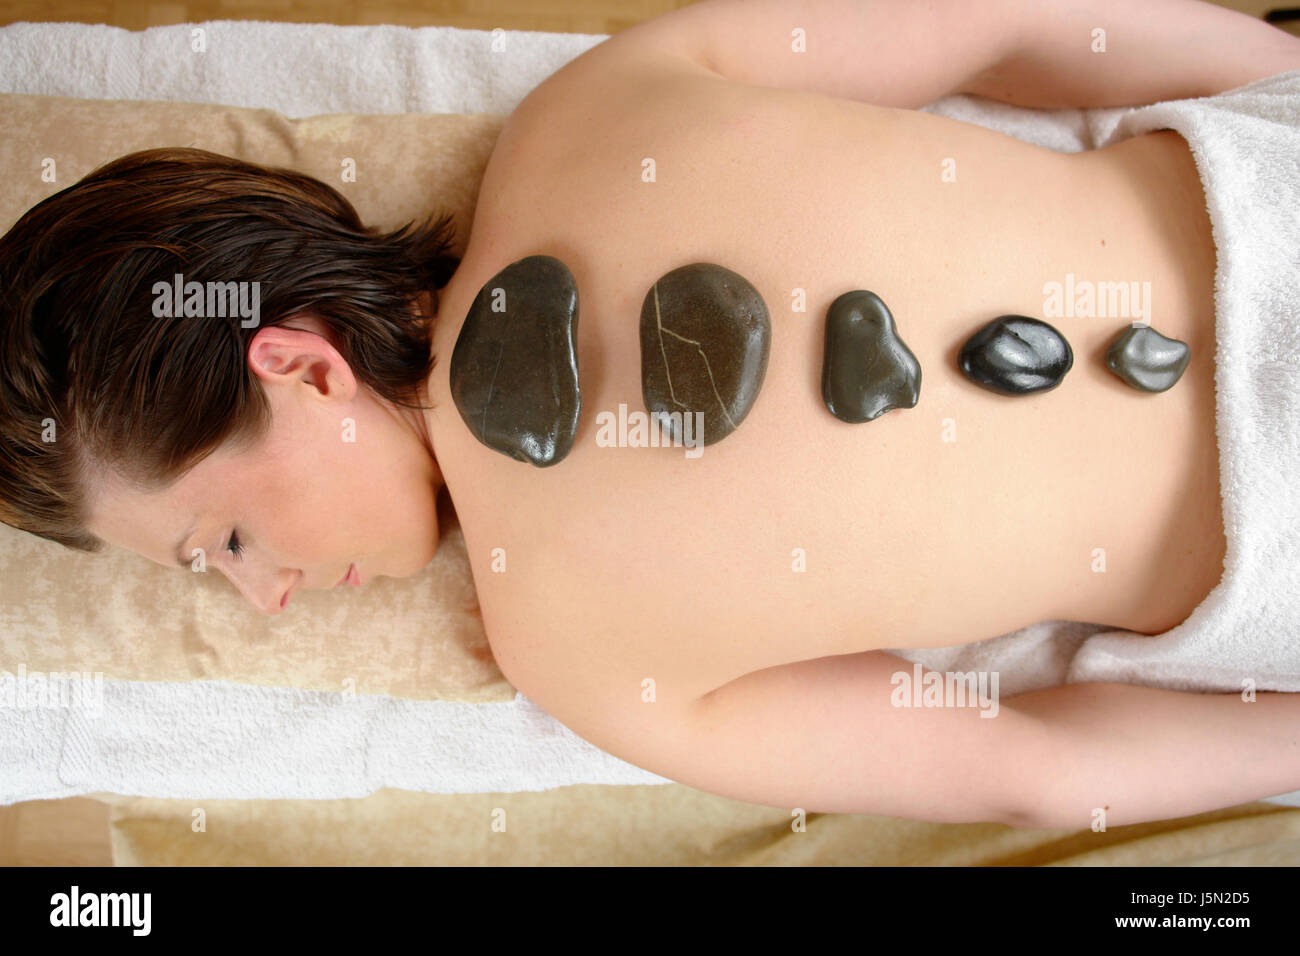 woman humans human beings people folk persons human human being relaxation Stock Photo